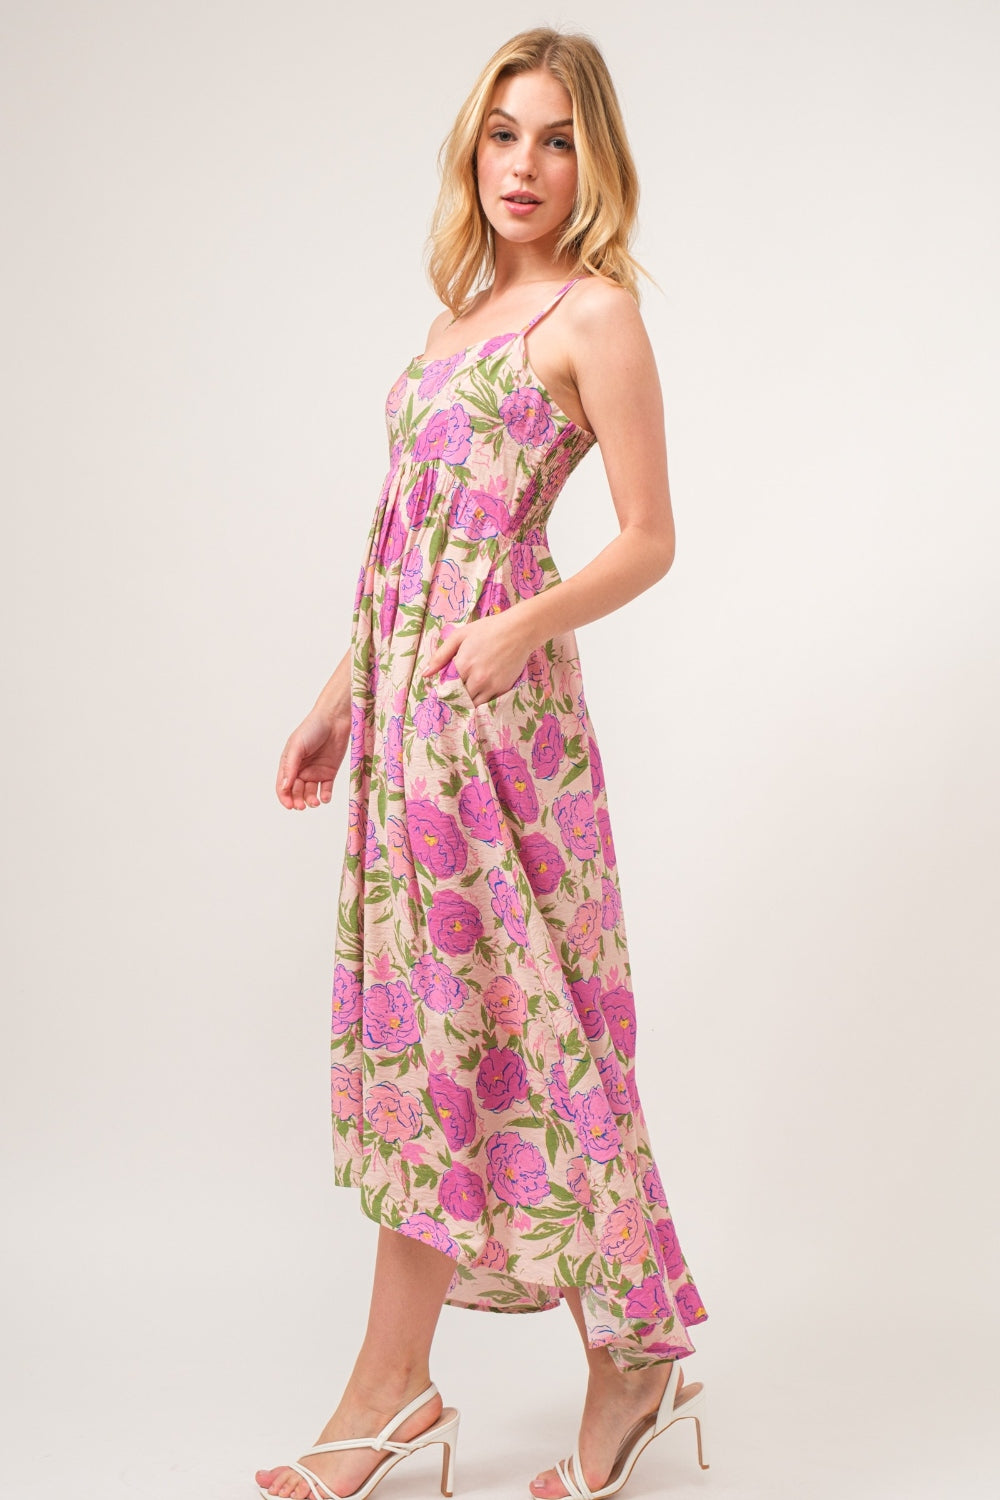 [And The Why] Floral High-Low Hem Cami Dress